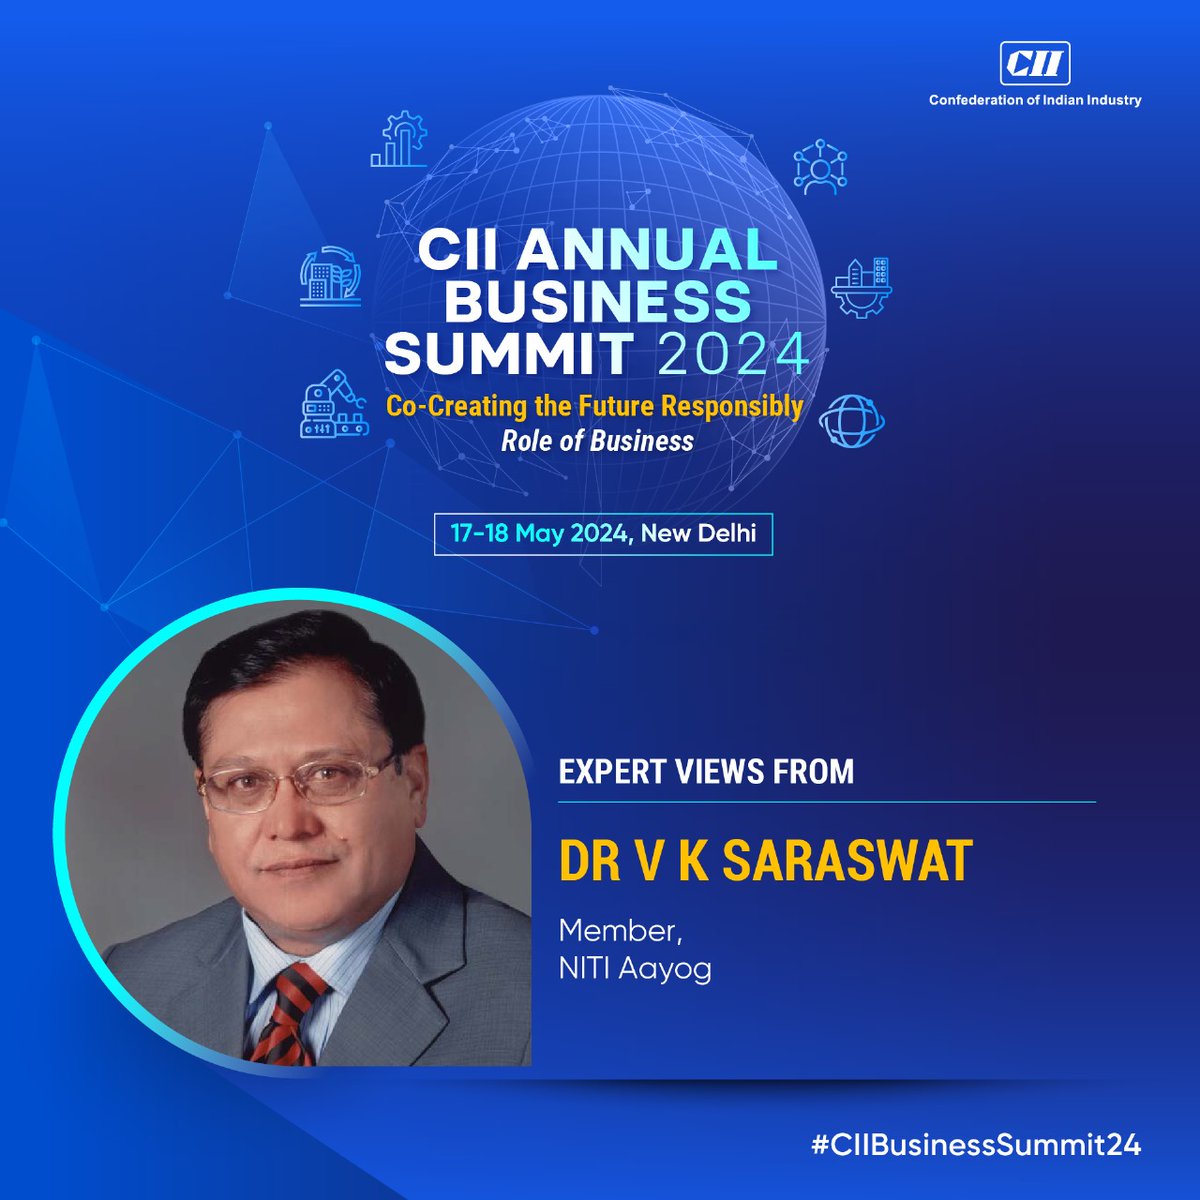 Listen to @DrVKSaraswat, Member, @NITIAayog share insights at the CII Annual Business Summit 2024! Join the discussion as top experts and thought leaders deliberate on India's journey towards development and economic prosperity. Block your calendar ➡17-18 May